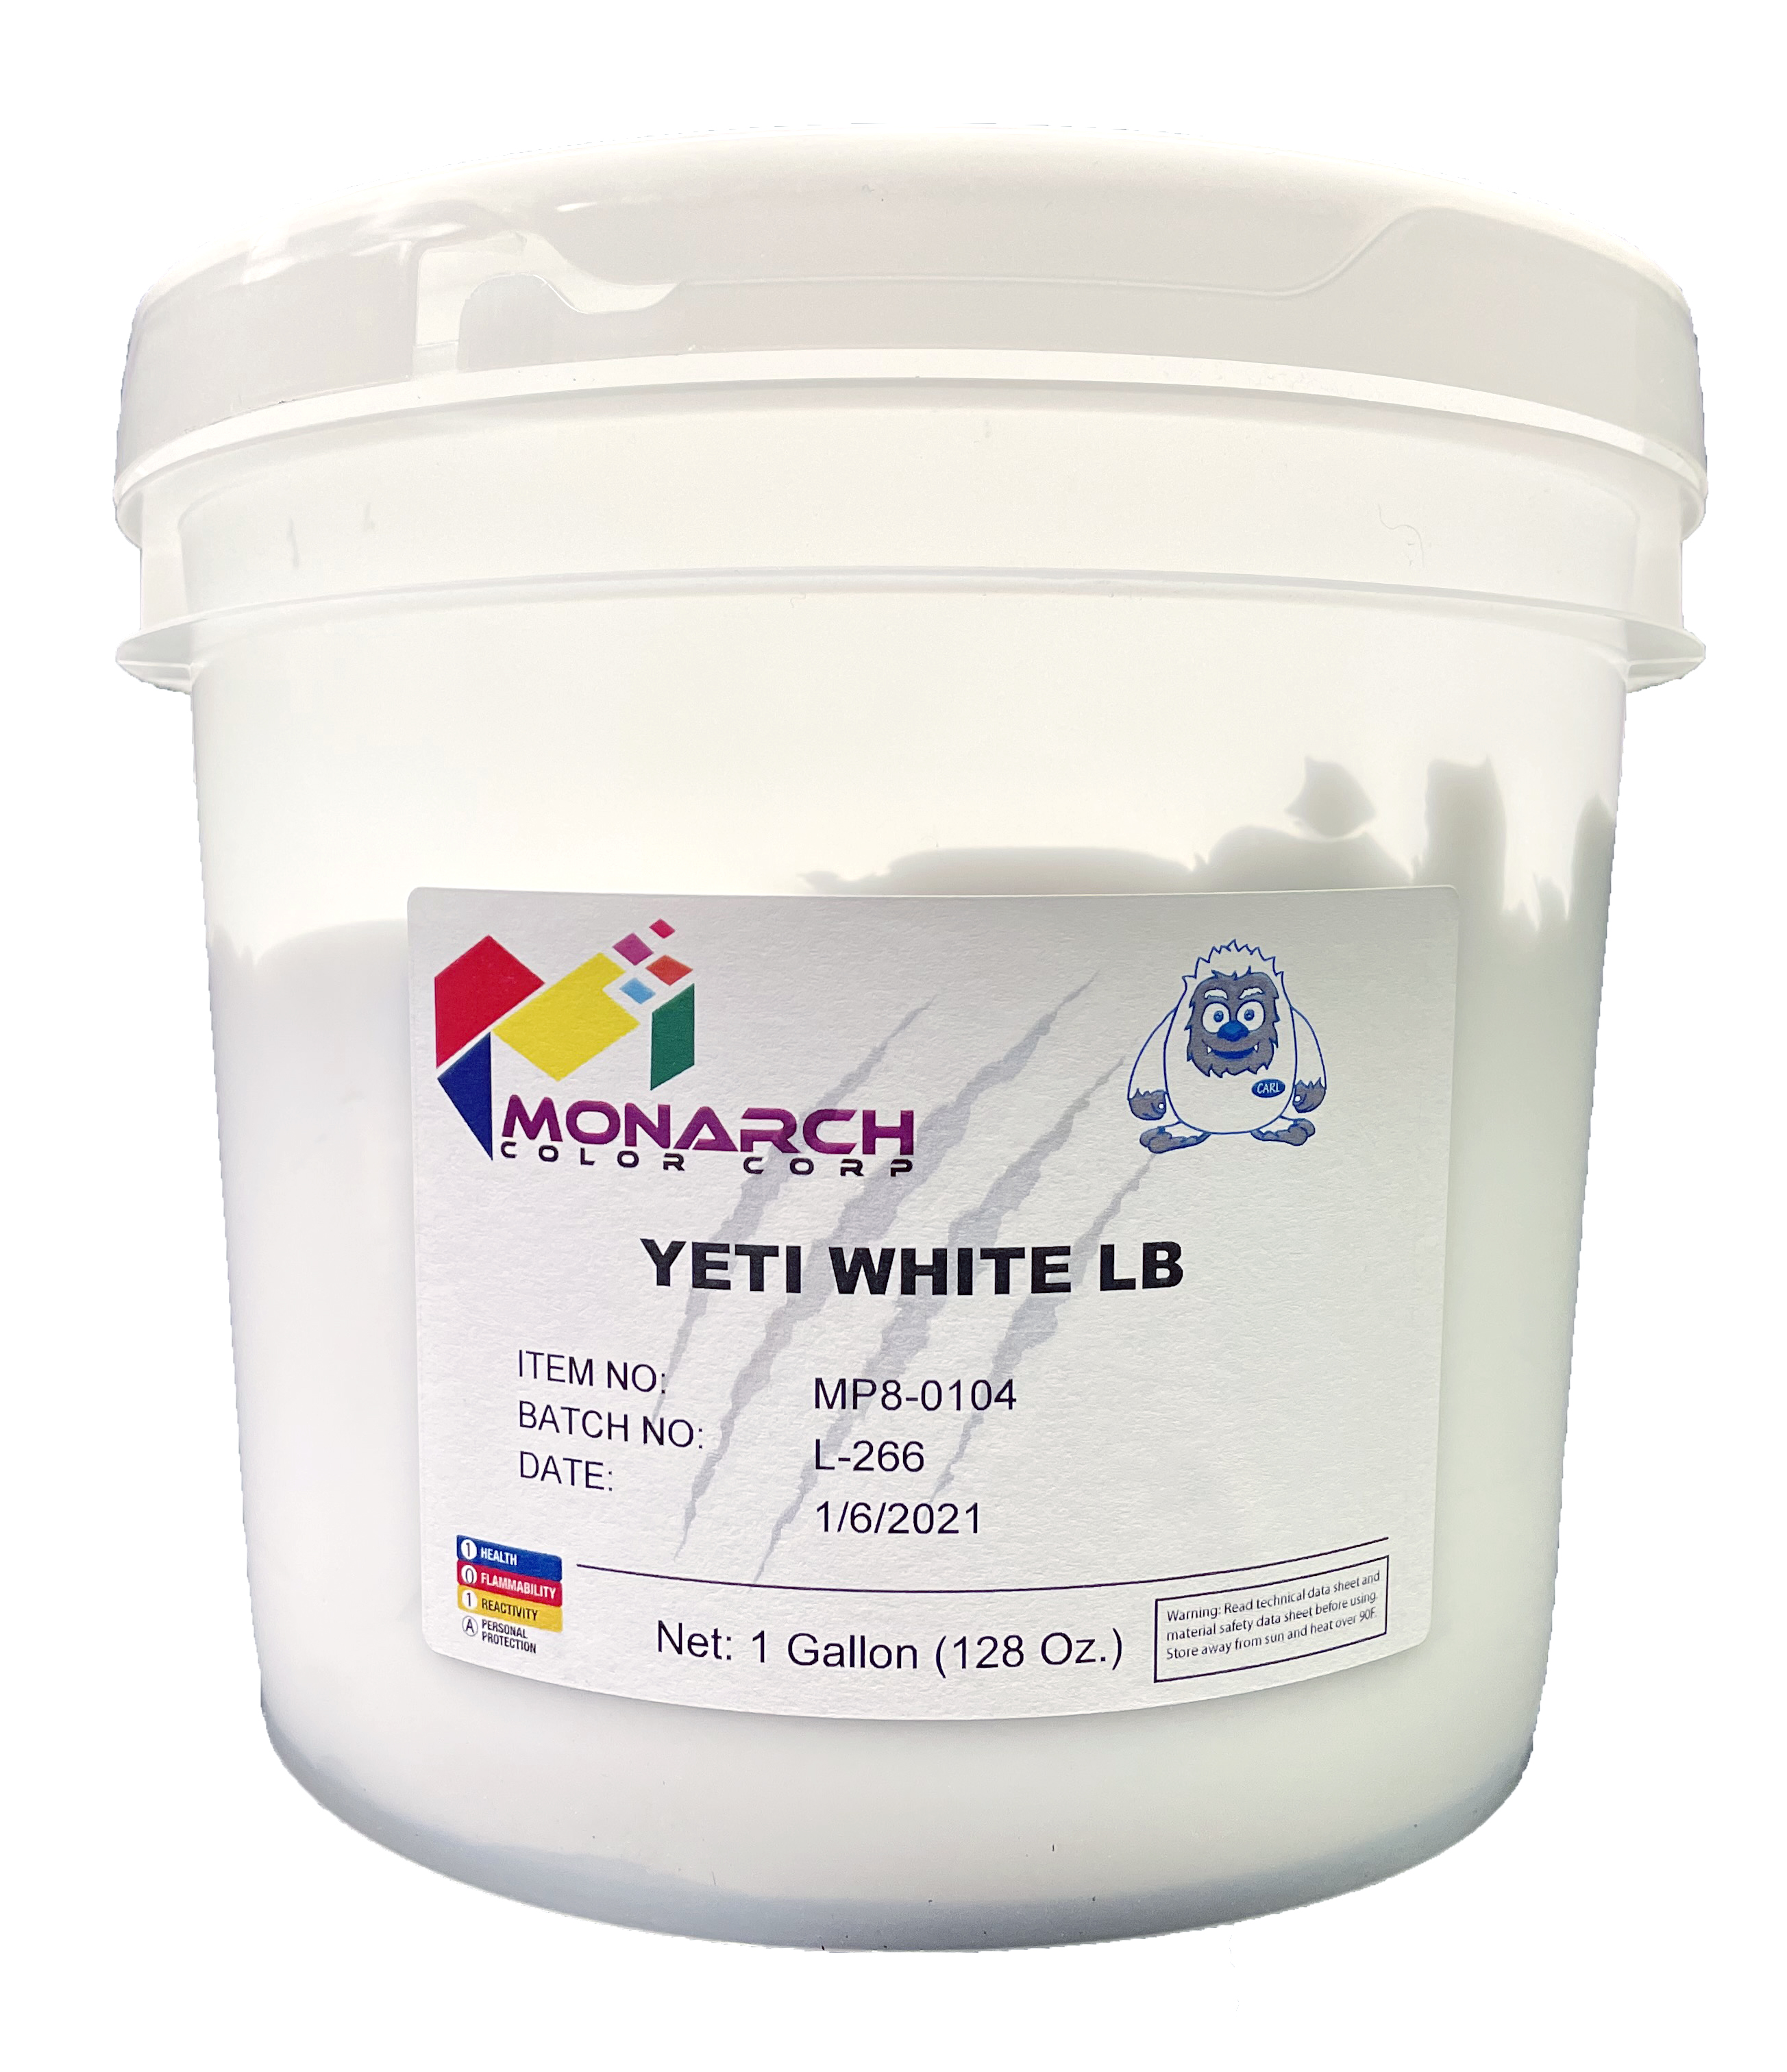 Yeti LB White is a non-phthalate, lead free, High Opacity, bright, high performance white that has excellent coverage on dark garments. The low tack formula allows printing through finer mesh counts without the use of viscosity modifier. Yeti LB White performs well on both automatic and manual presses. Has good bleed resistance for printing on Polyester Blends.